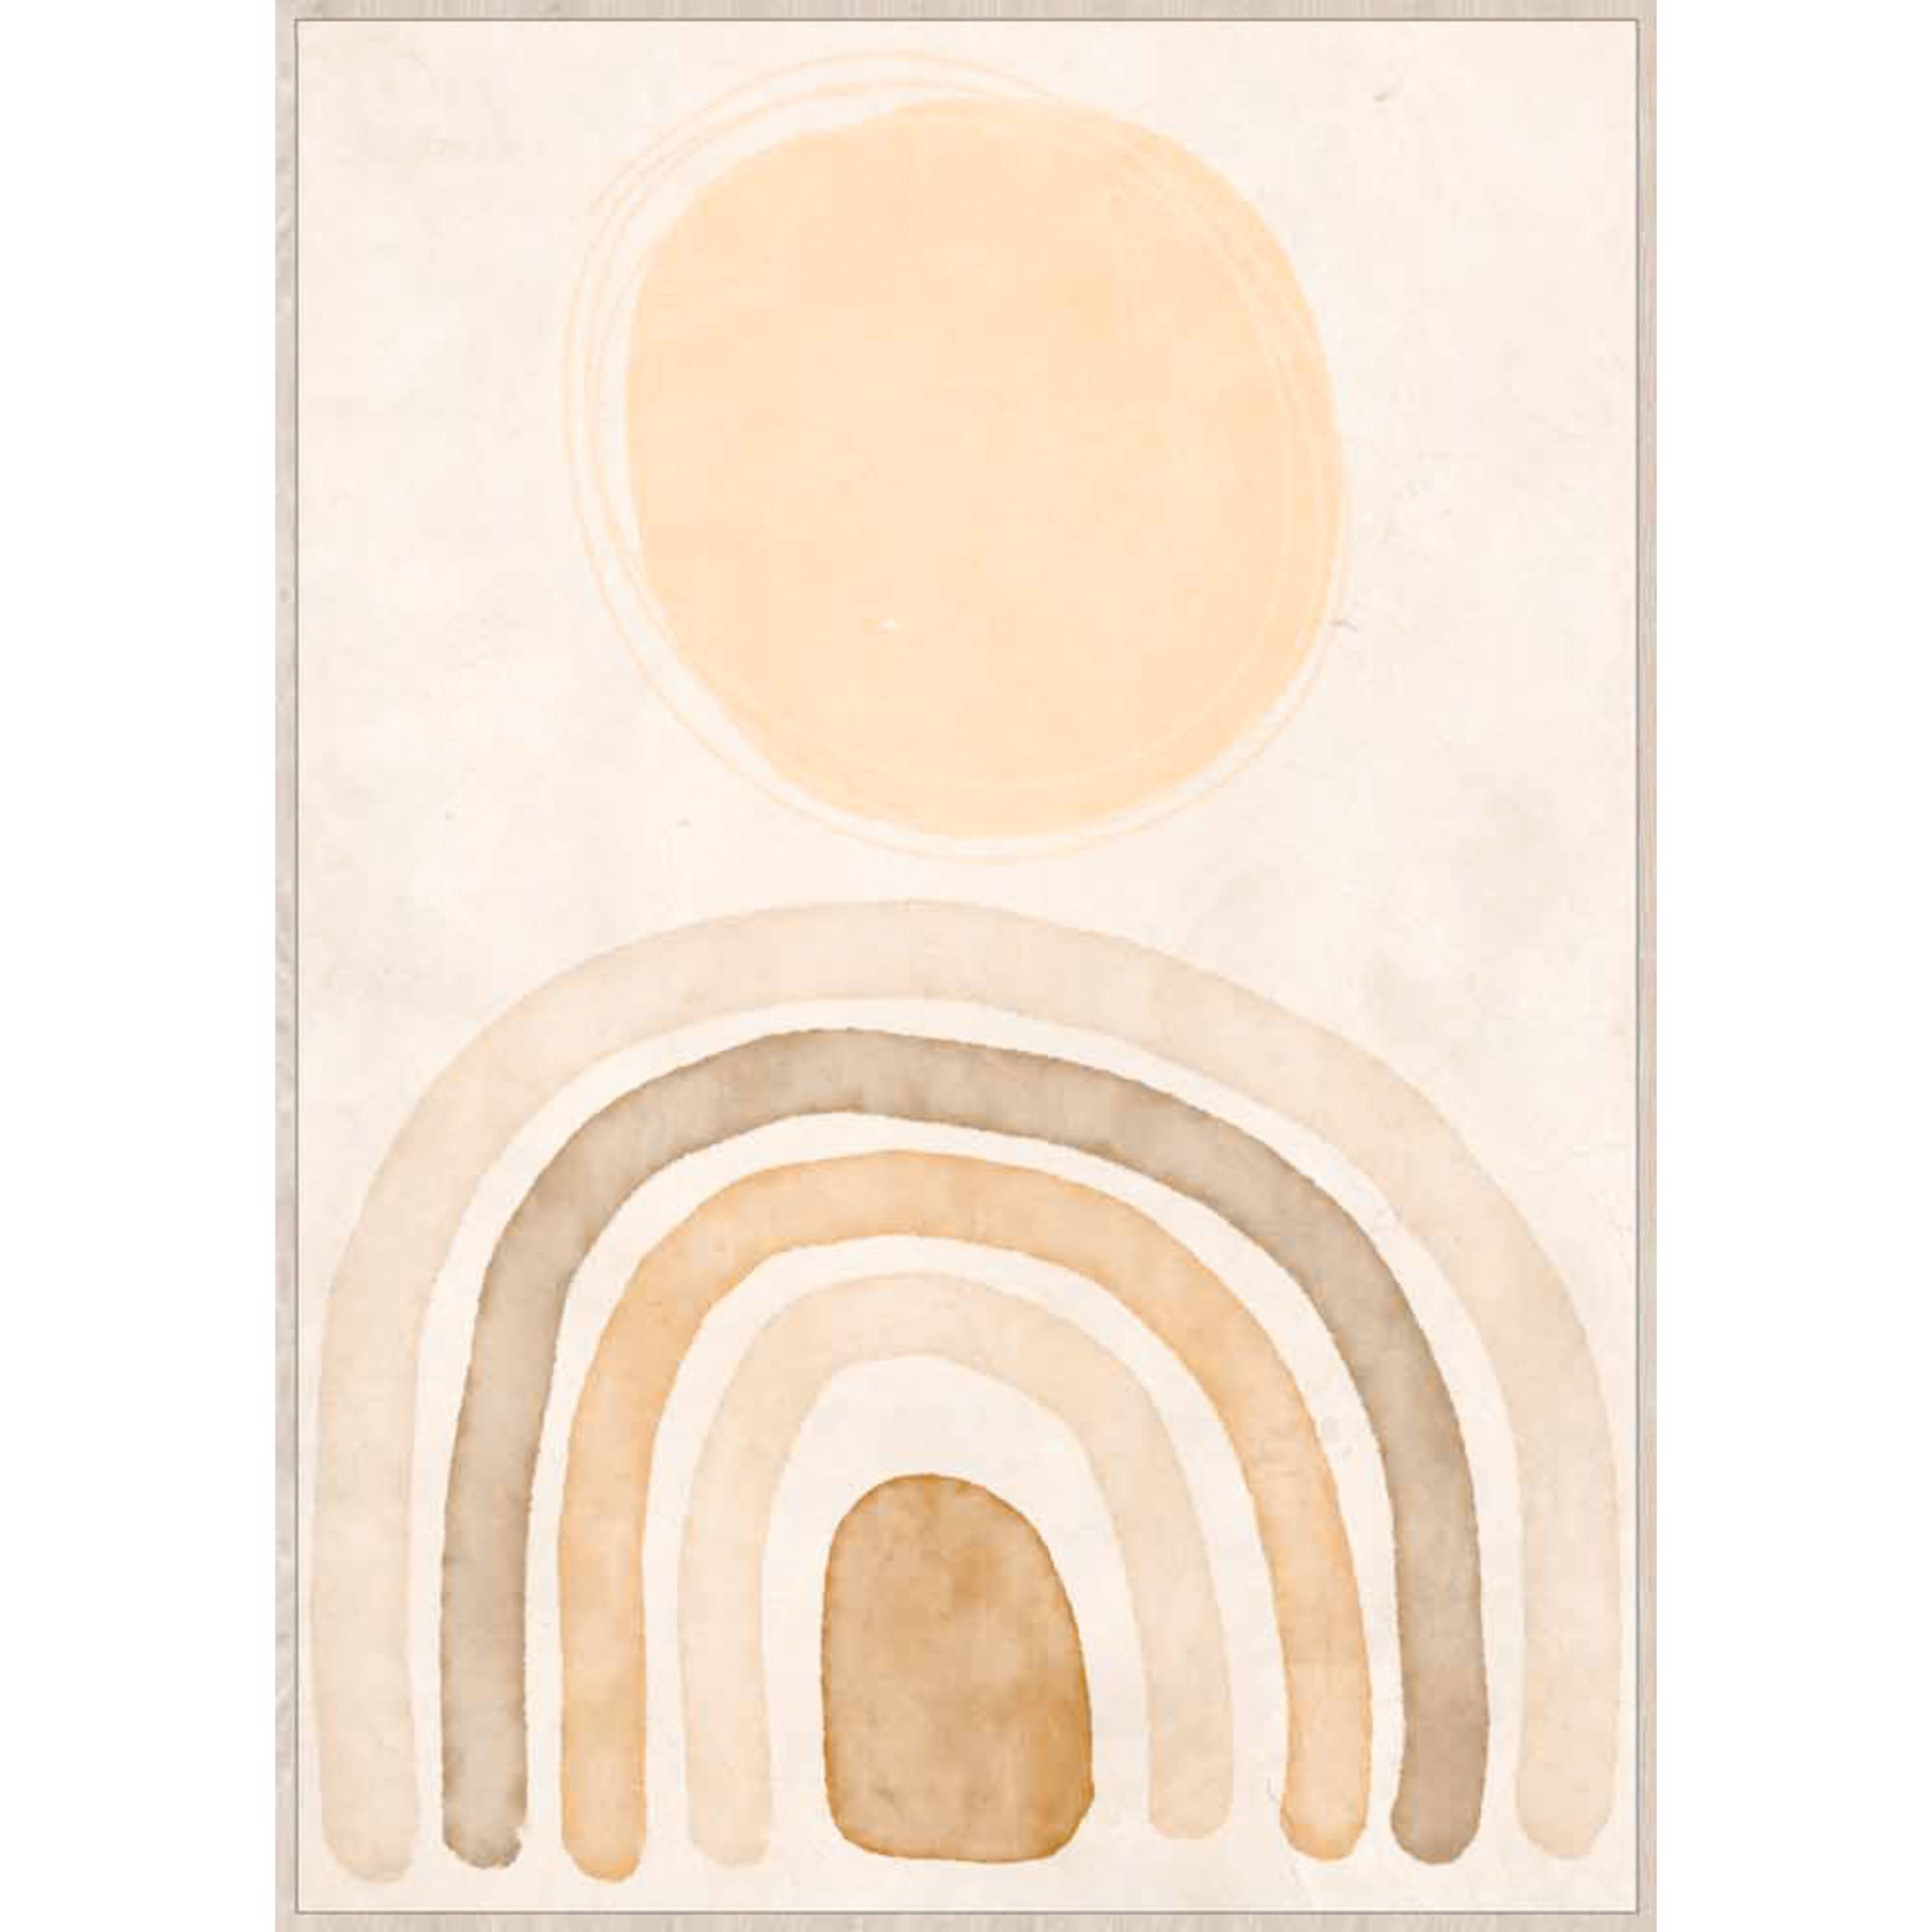 Dawn Rainbow sepia-toned artwork with natural frame, measuring 62cm by 92cm, perfect for home decor.